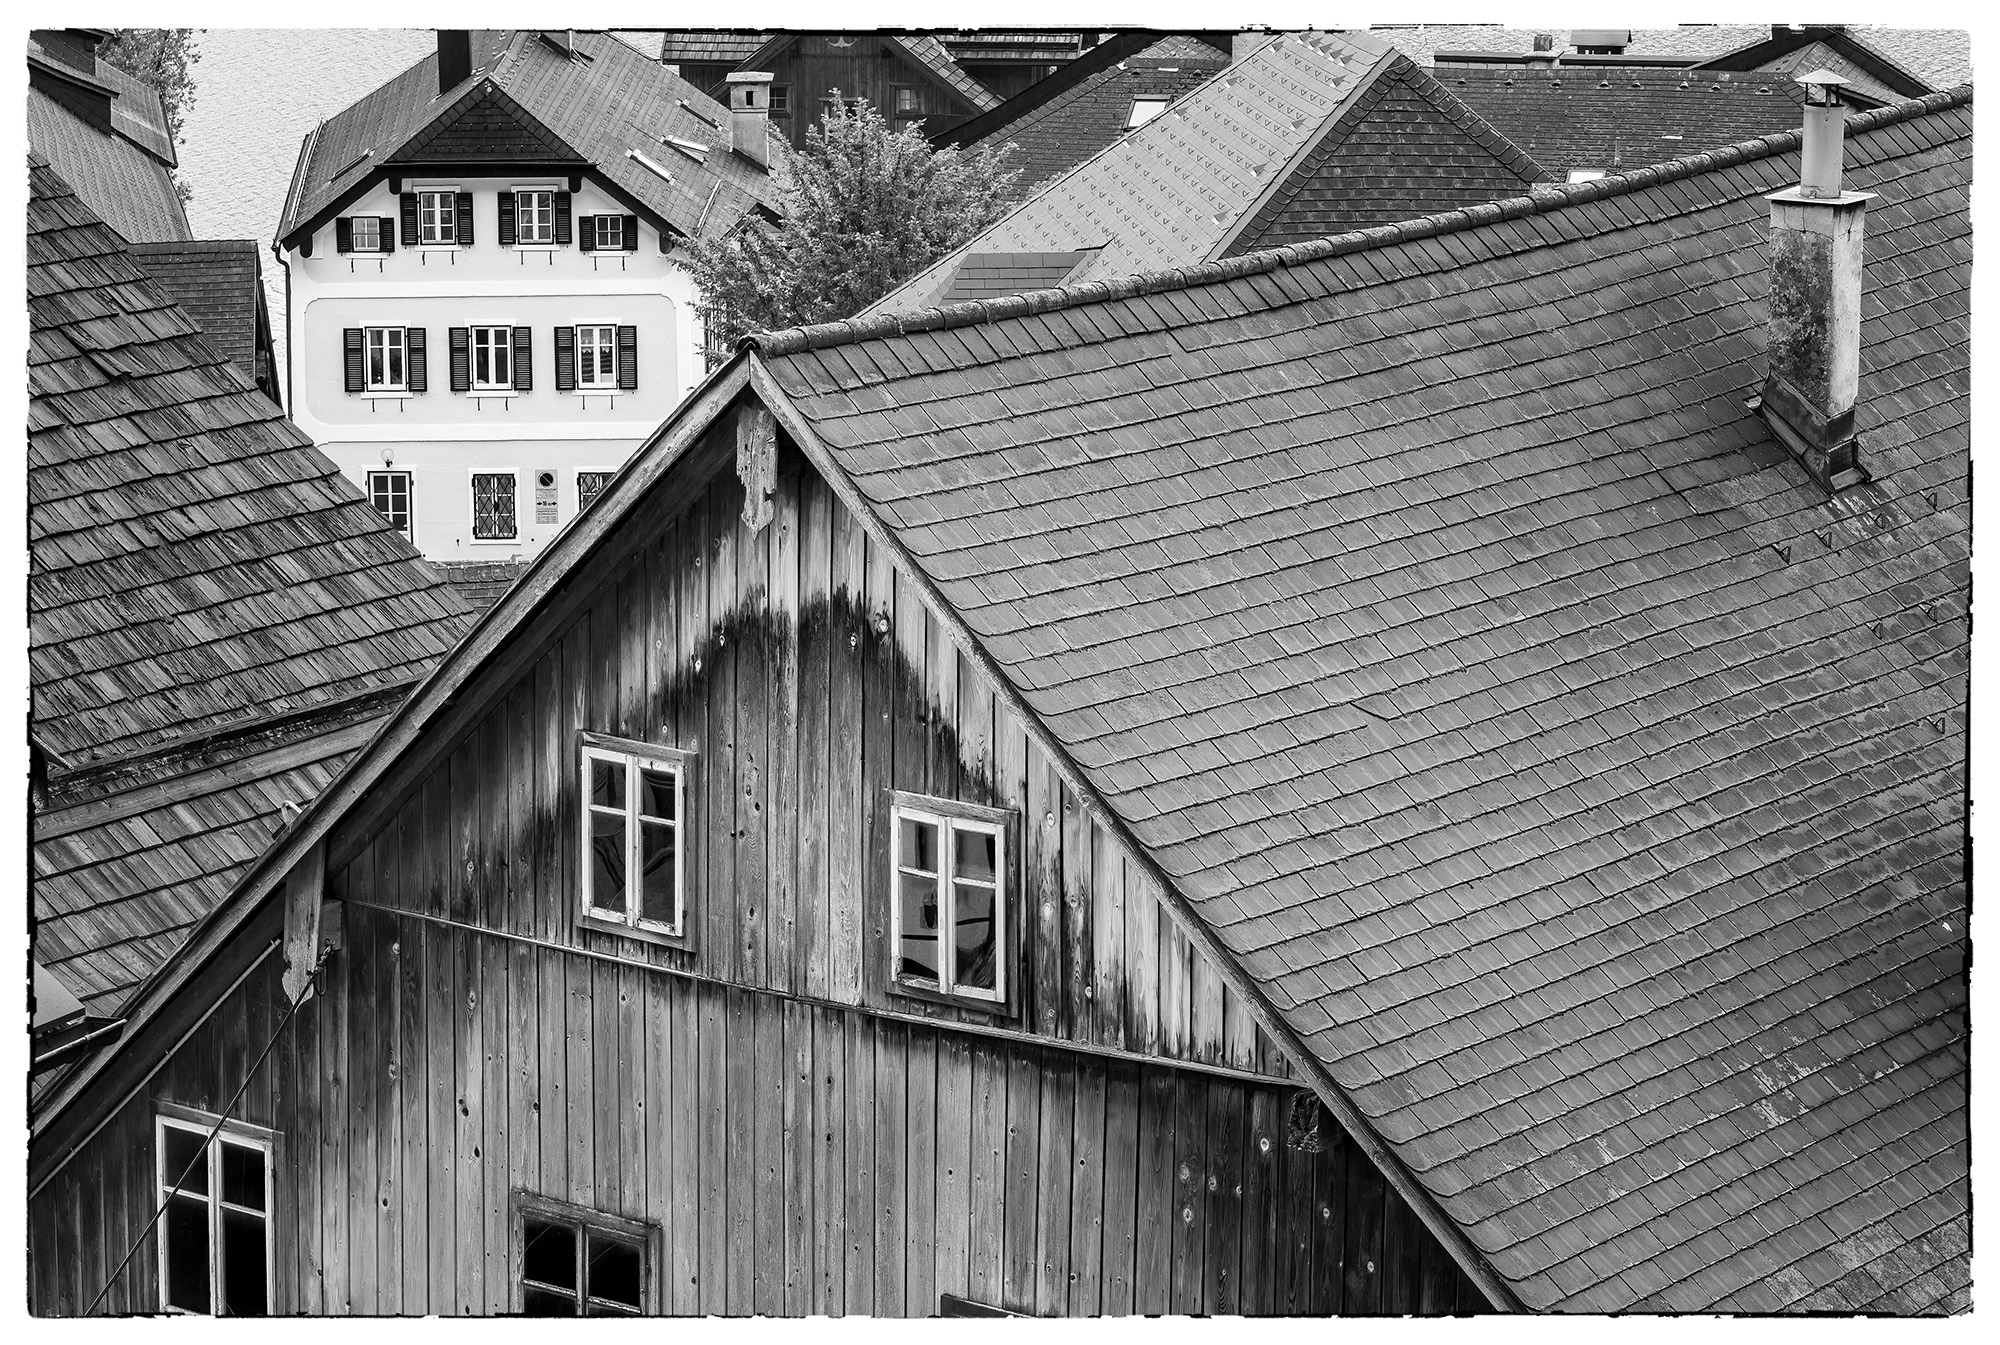 This black & white photograph captures the essence of a quaint village nestled in Austria's picturesque Lake District. The charming...